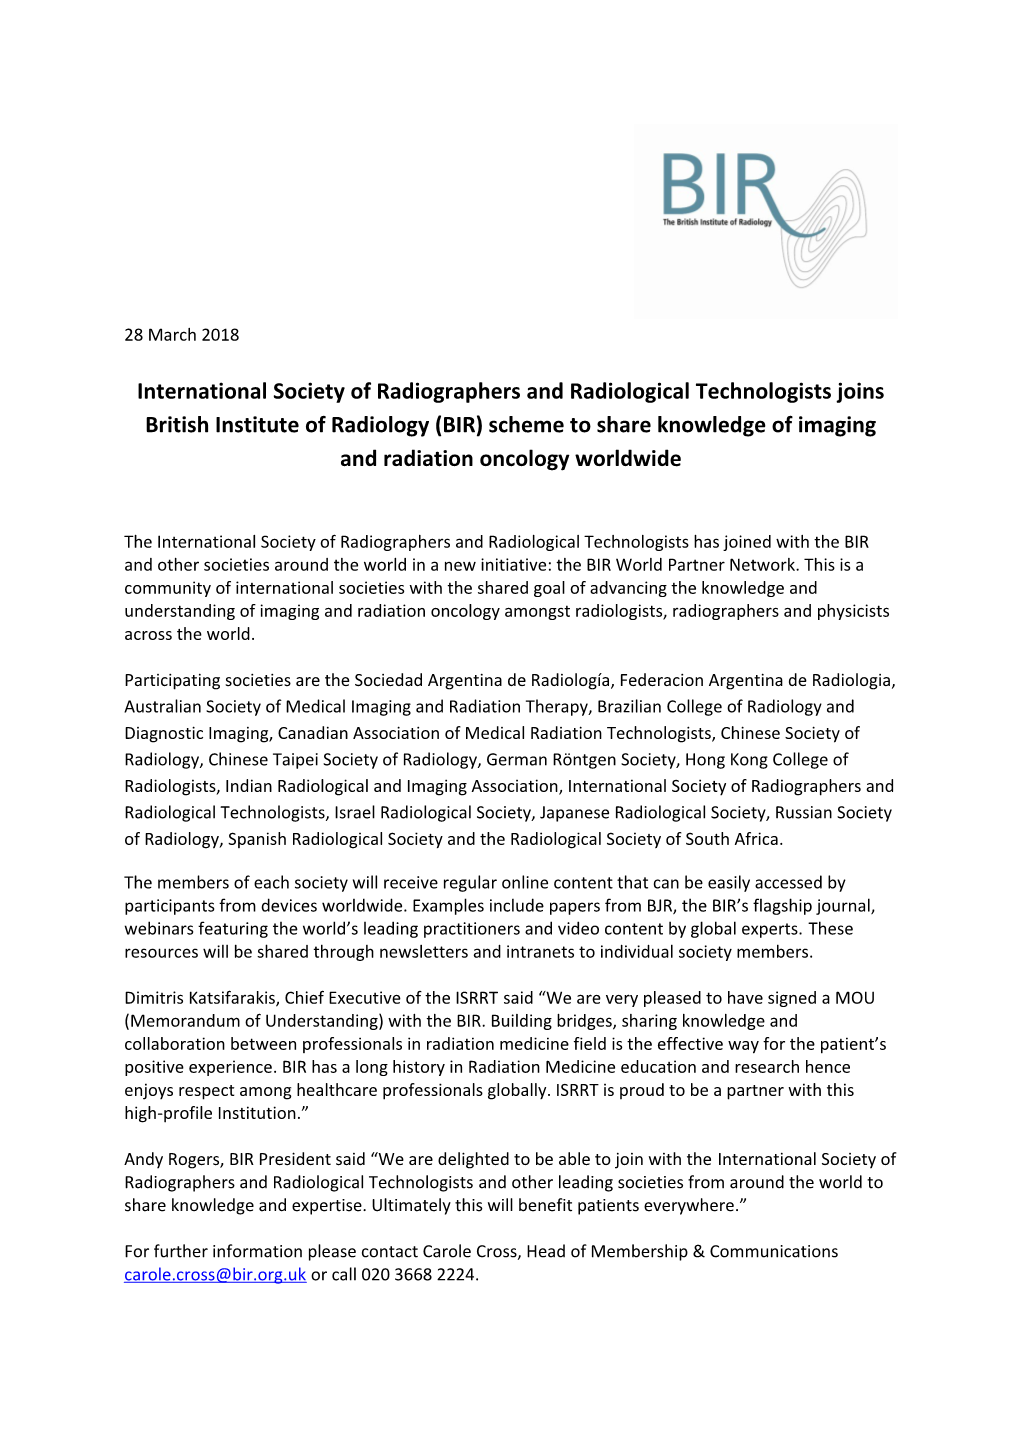 International Society of Radiographers and Radiological Technologistsjoins British Institute